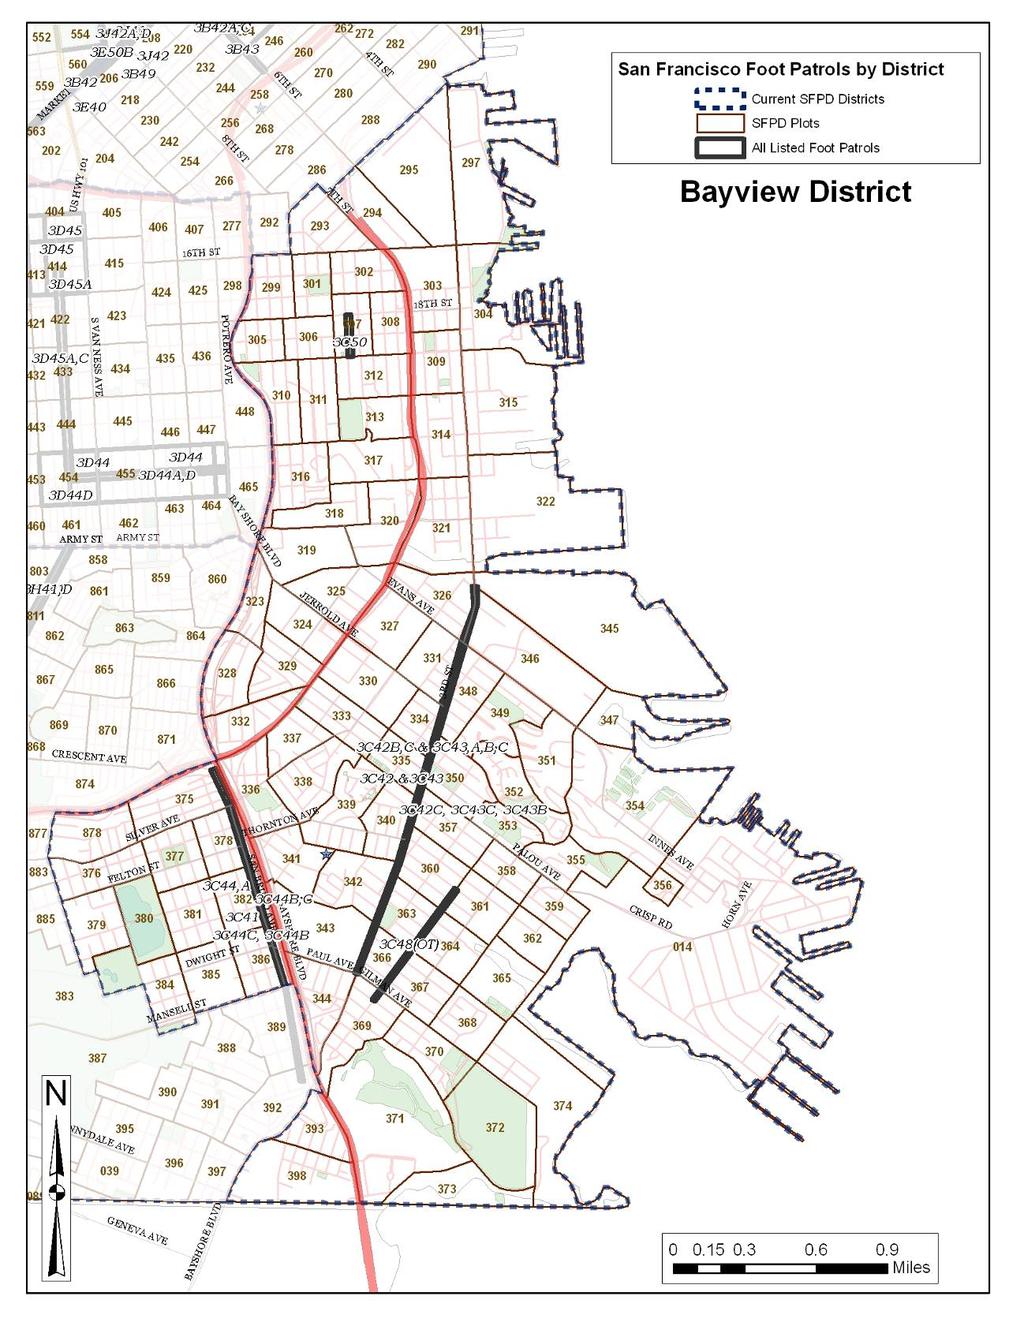 Map 12: Bayview District Beats 58 Source: PSSG based on SFPD shape files and